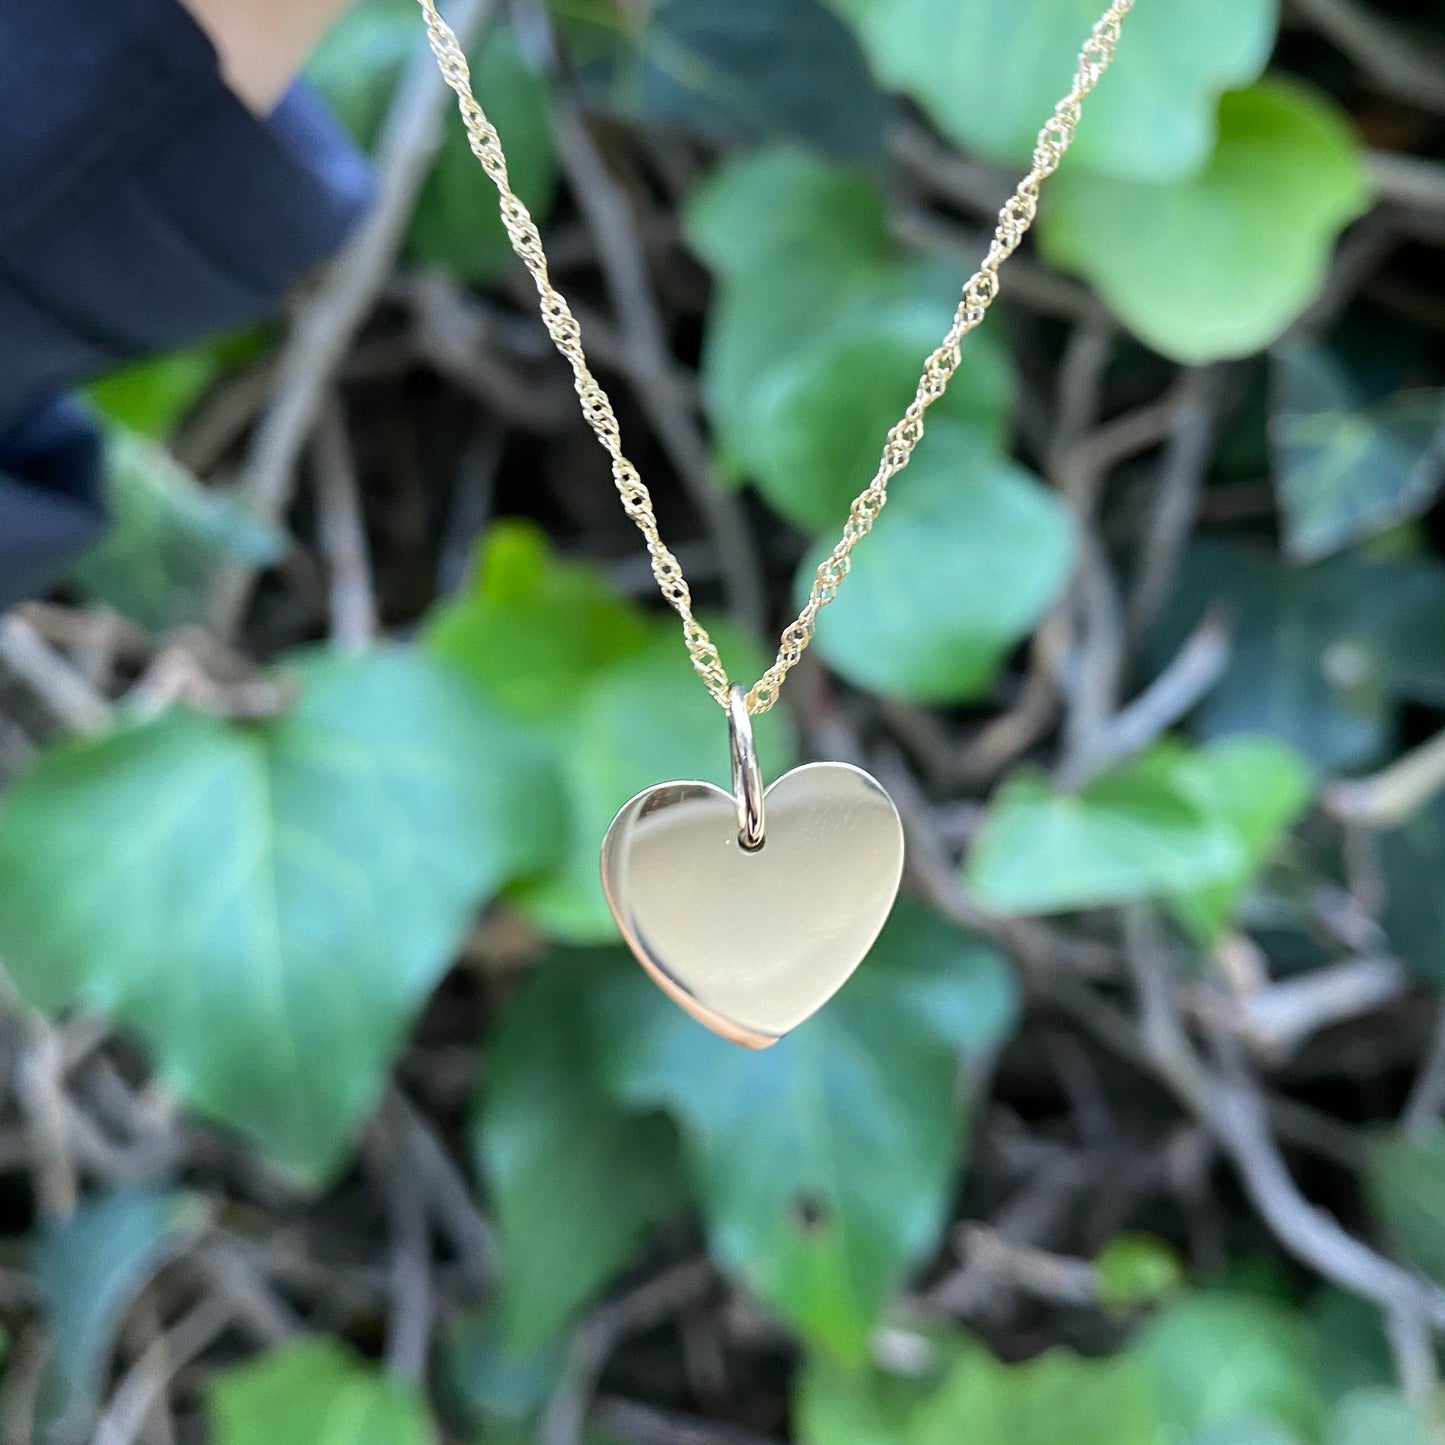 Heart necklace to engrave